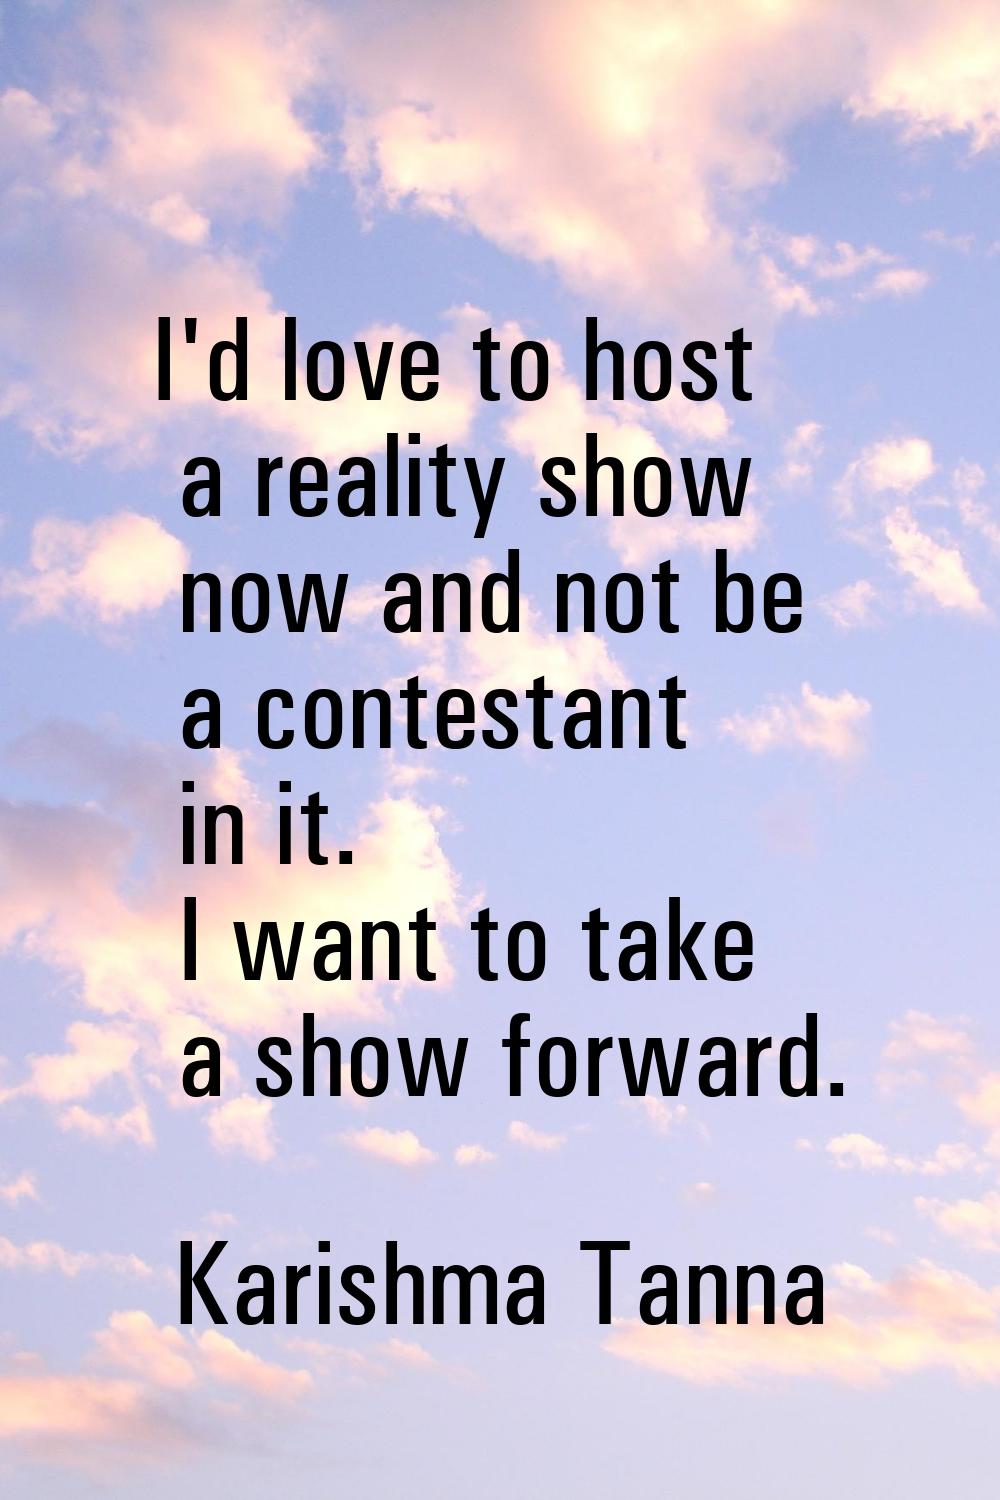 I'd love to host a reality show now and not be a contestant in it. I want to take a show forward.